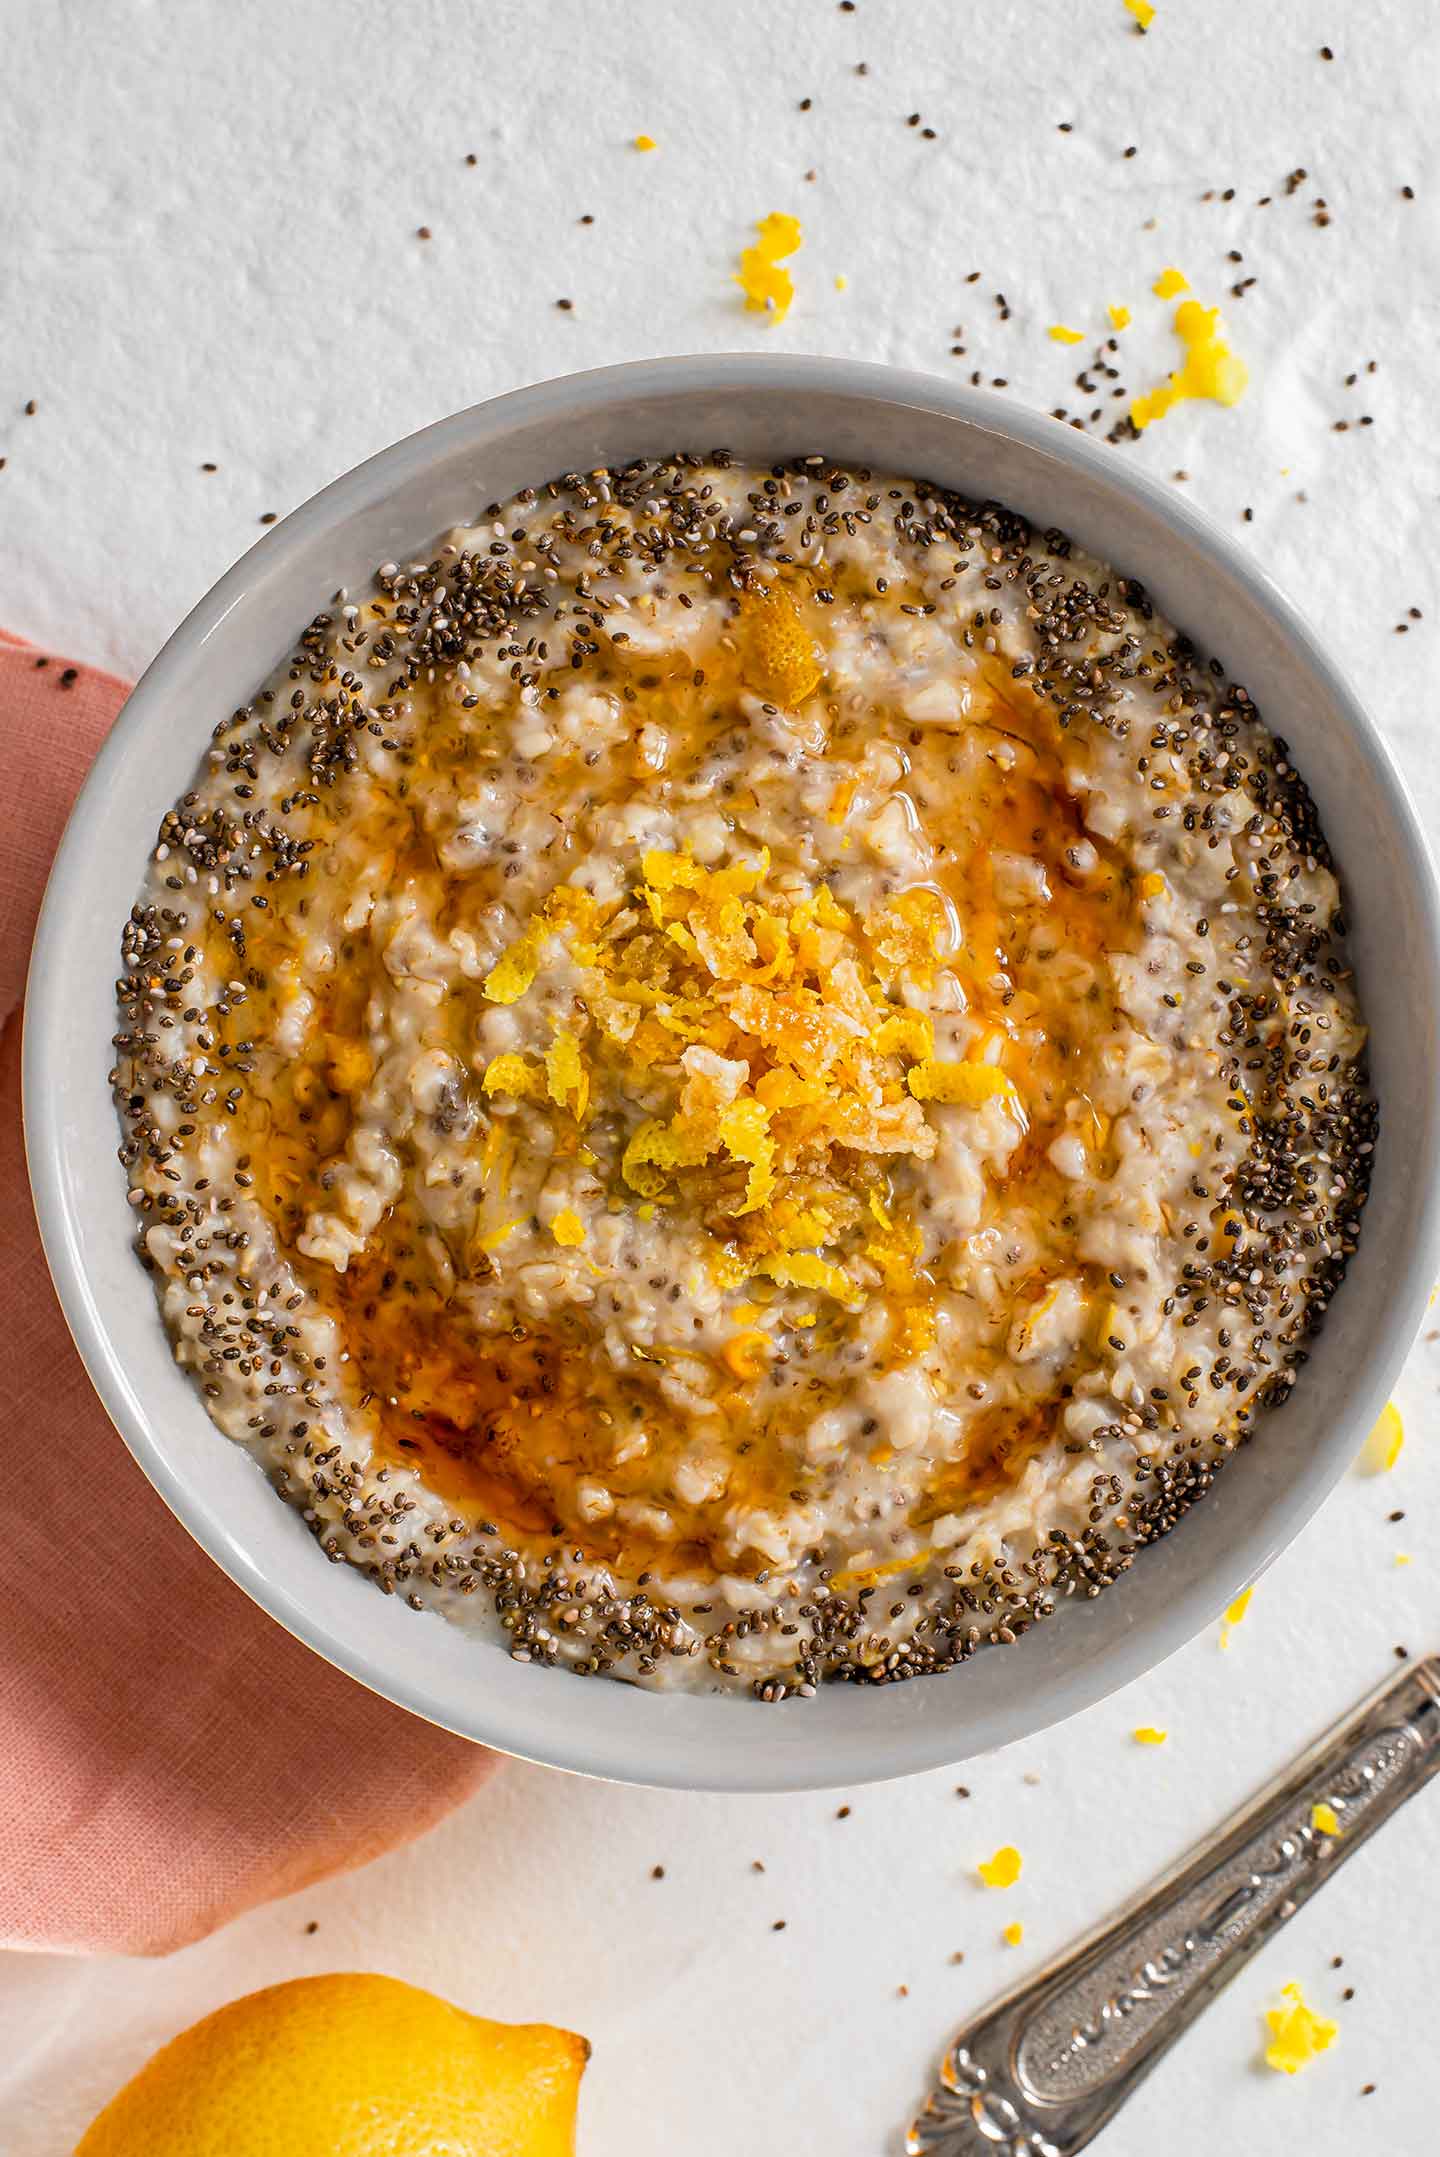 Top down view of maple syrup swirled in a bowl of lemon chia oats. Extra chia seeds are sprinkled in a ring around the perimeter of the oats. Candied ginger and lemon zest are piled in the centre of the oats.